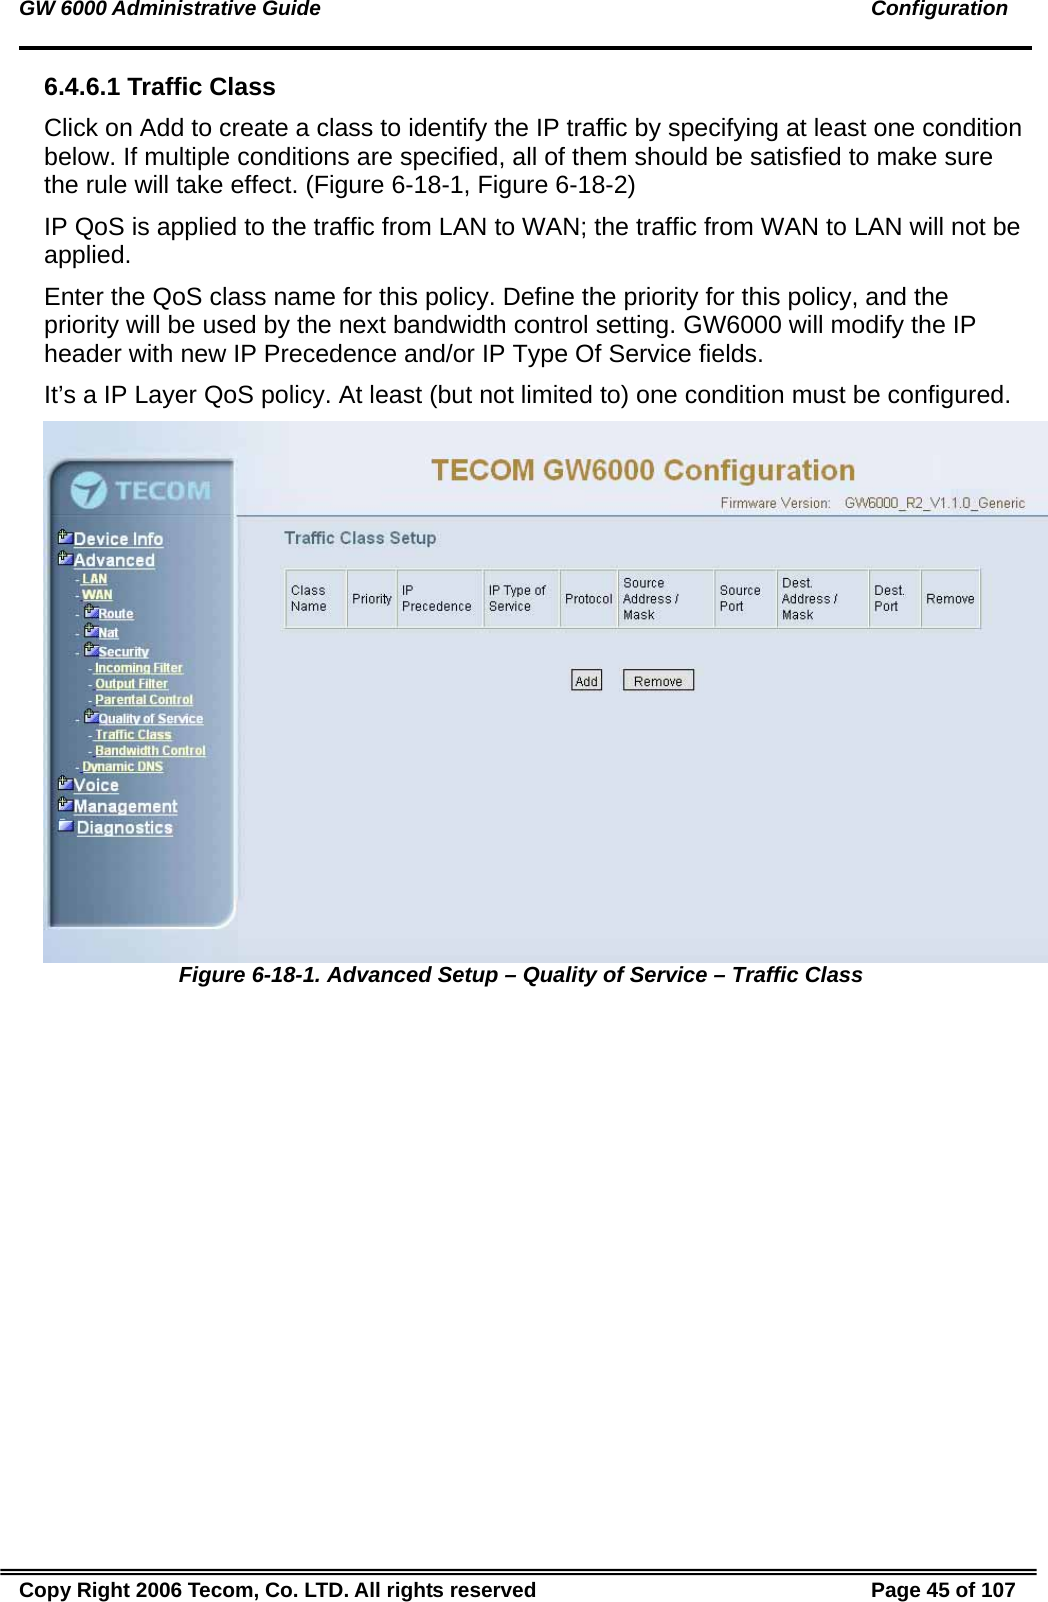 GW 6000 Administrative Guide                                                                                               Configuration 6.4.6.1 Traffic Class Click on Add to create a class to identify the IP traffic by specifying at least one condition below. If multiple conditions are specified, all of them should be satisfied to make sure the rule will take effect. (Figure 6-18-1, Figure 6-18-2) IP QoS is applied to the traffic from LAN to WAN; the traffic from WAN to LAN will not be applied. Enter the QoS class name for this policy. Define the priority for this policy, and the priority will be used by the next bandwidth control setting. GW6000 will modify the IP header with new IP Precedence and/or IP Type Of Service fields. It’s a IP Layer QoS policy. At least (but not limited to) one condition must be configured.  Figure 6-18-1. Advanced Setup – Quality of Service – Traffic Class Copy Right 2006 Tecom, Co. LTD. All rights reserved  Page 45 of 107 